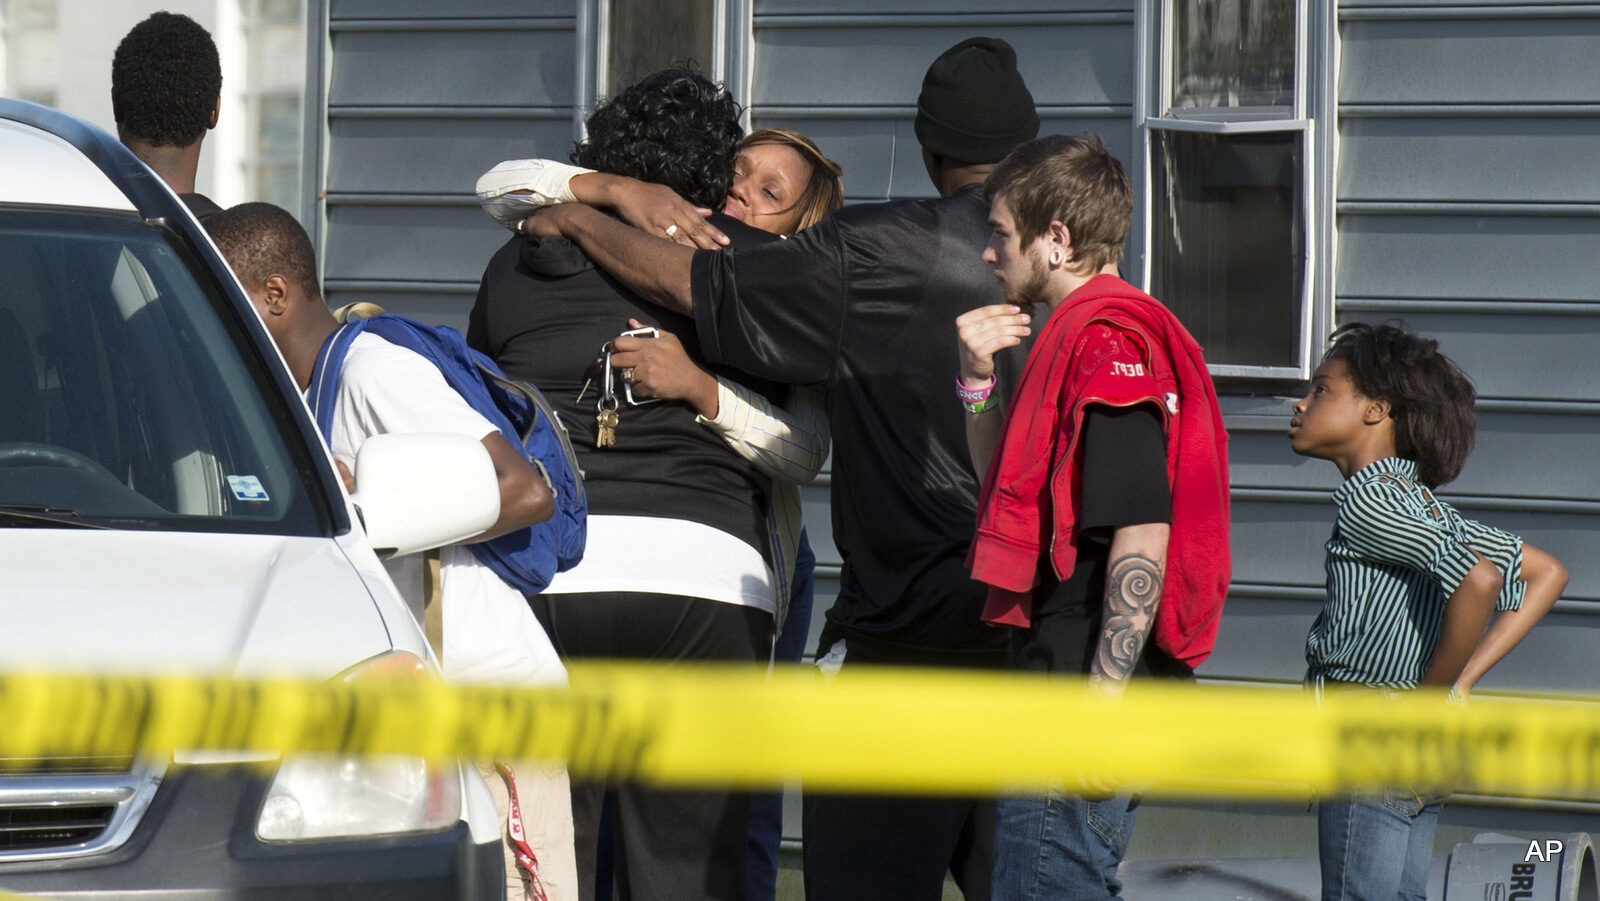 Onlookers gather outside of a house, where police say seven children and one adult have been found dead Monday, April 6, 2015, in Princess Anne, Md.